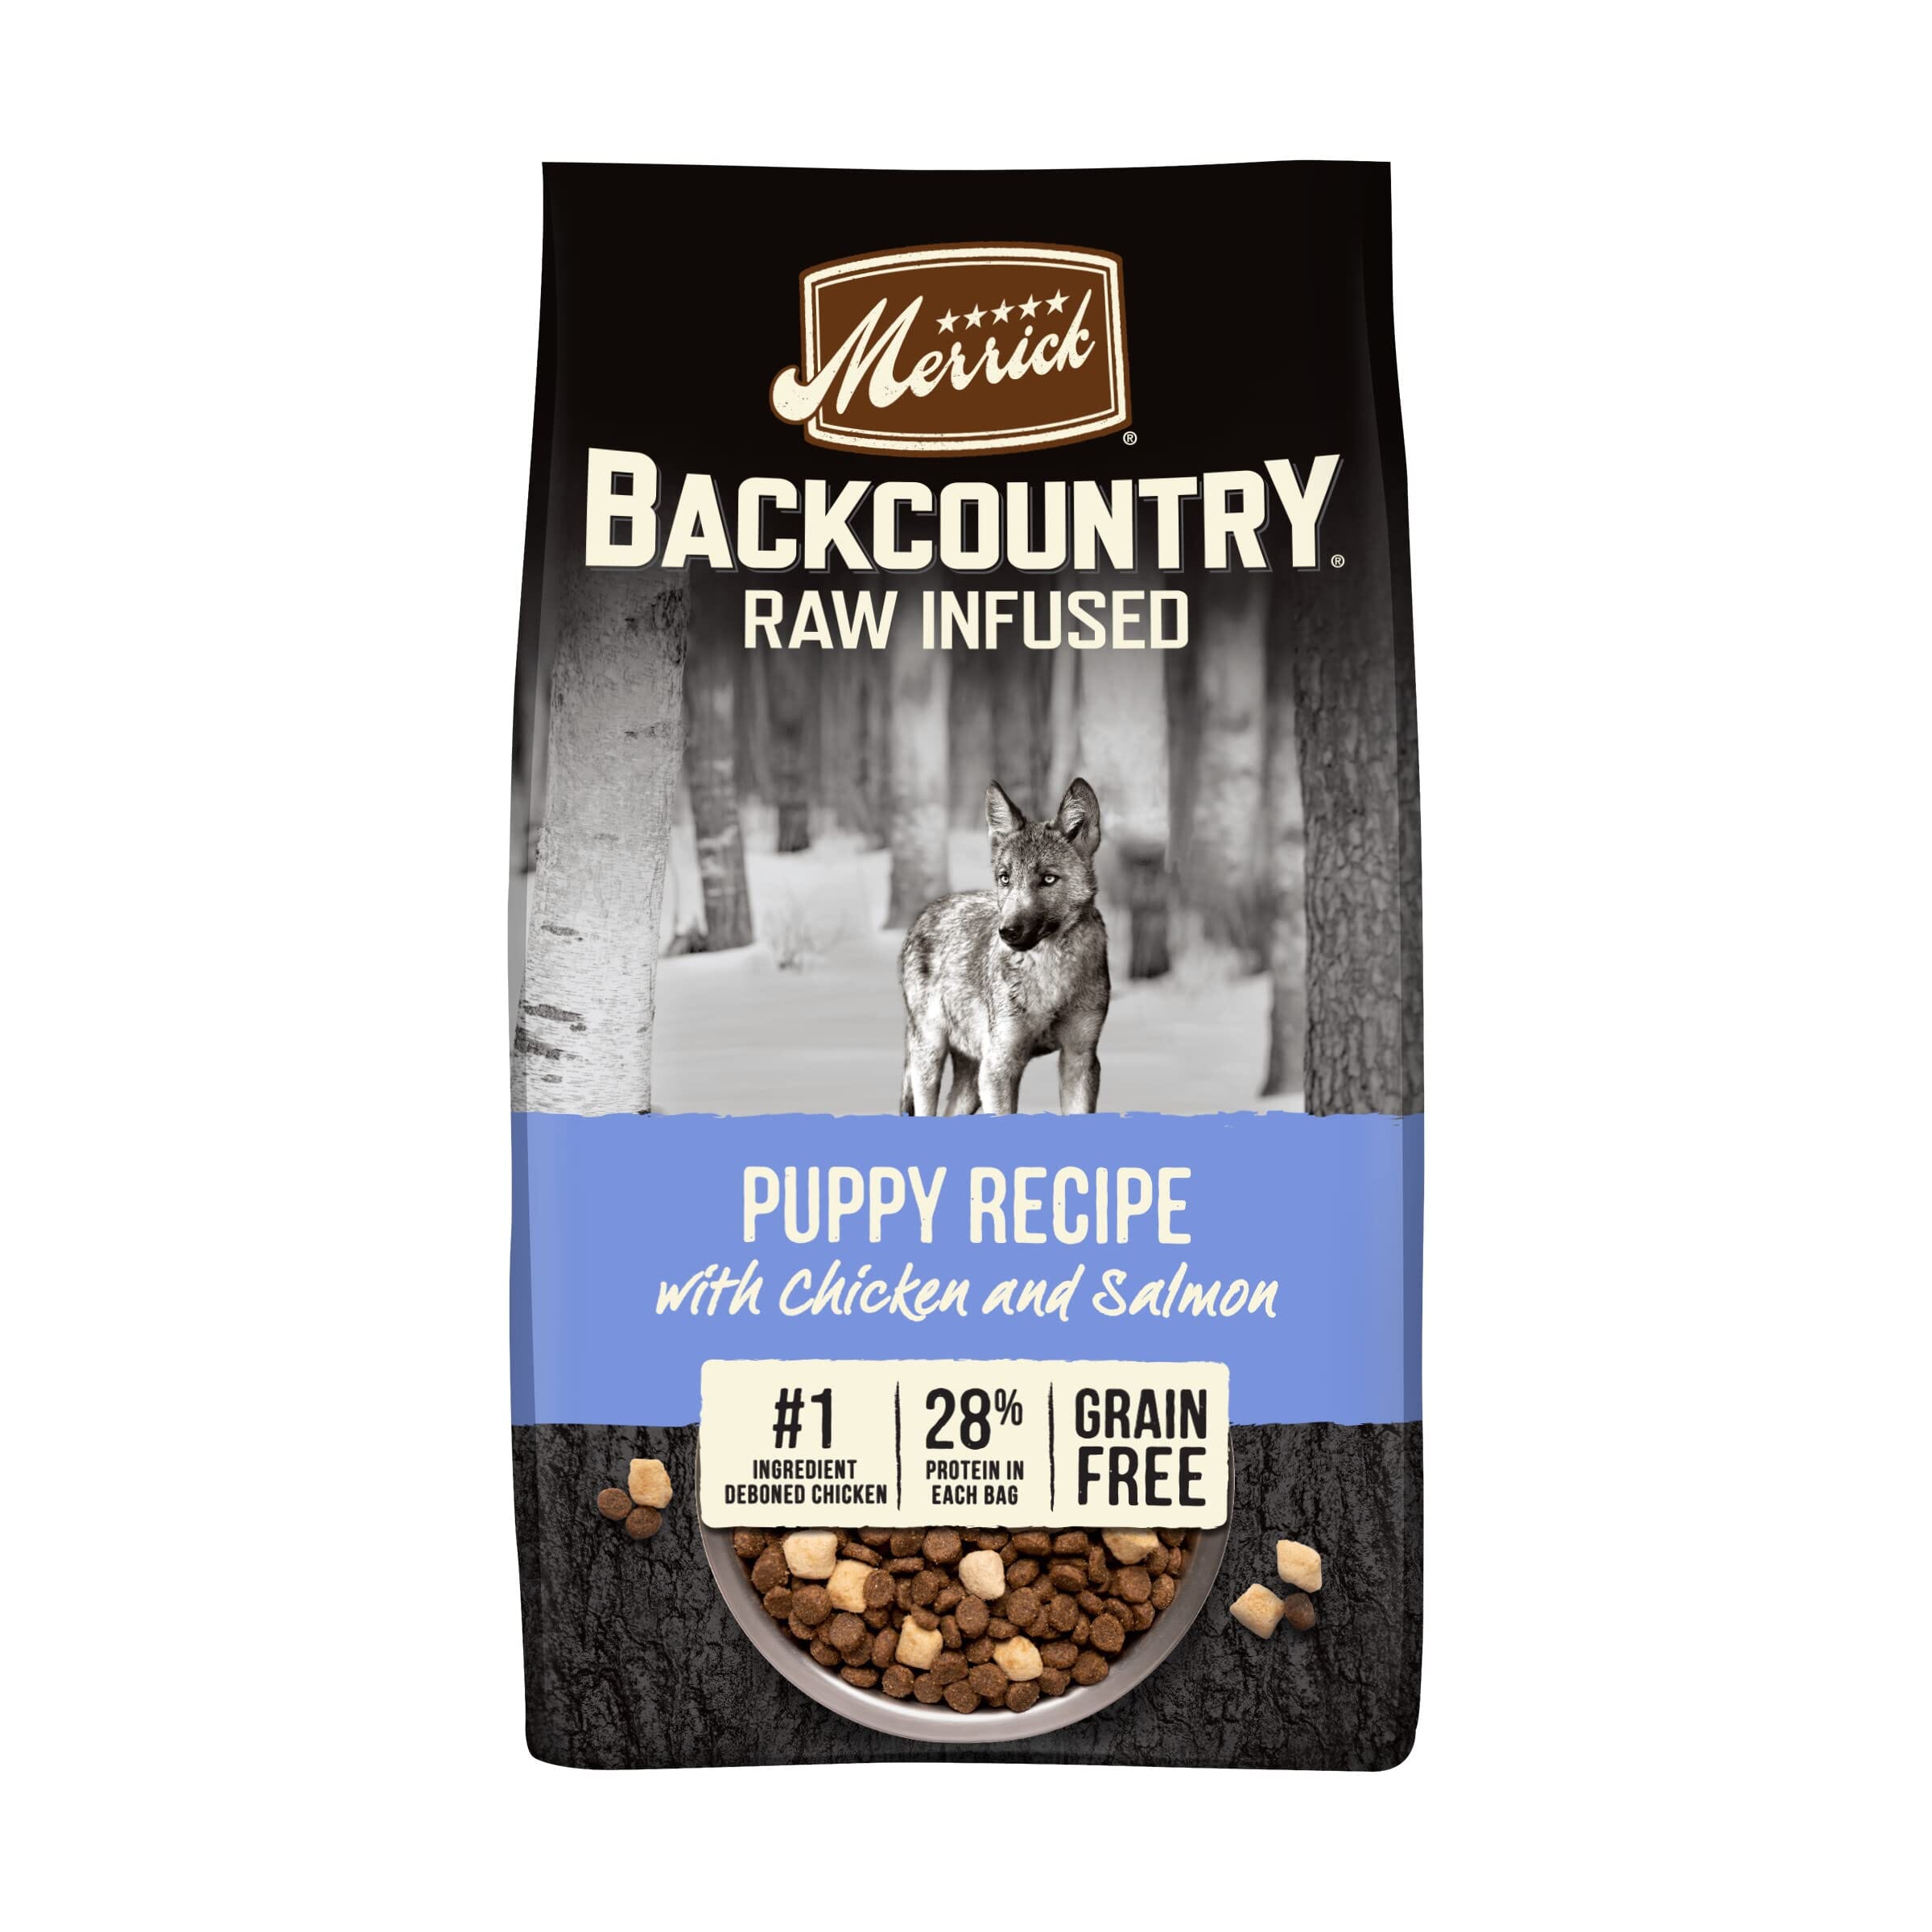 Merrick Backcountry Puppy Grain-Free Raw-Infused Chicken and Salmon Freeze-Dried Dog Food 4 Lbs 